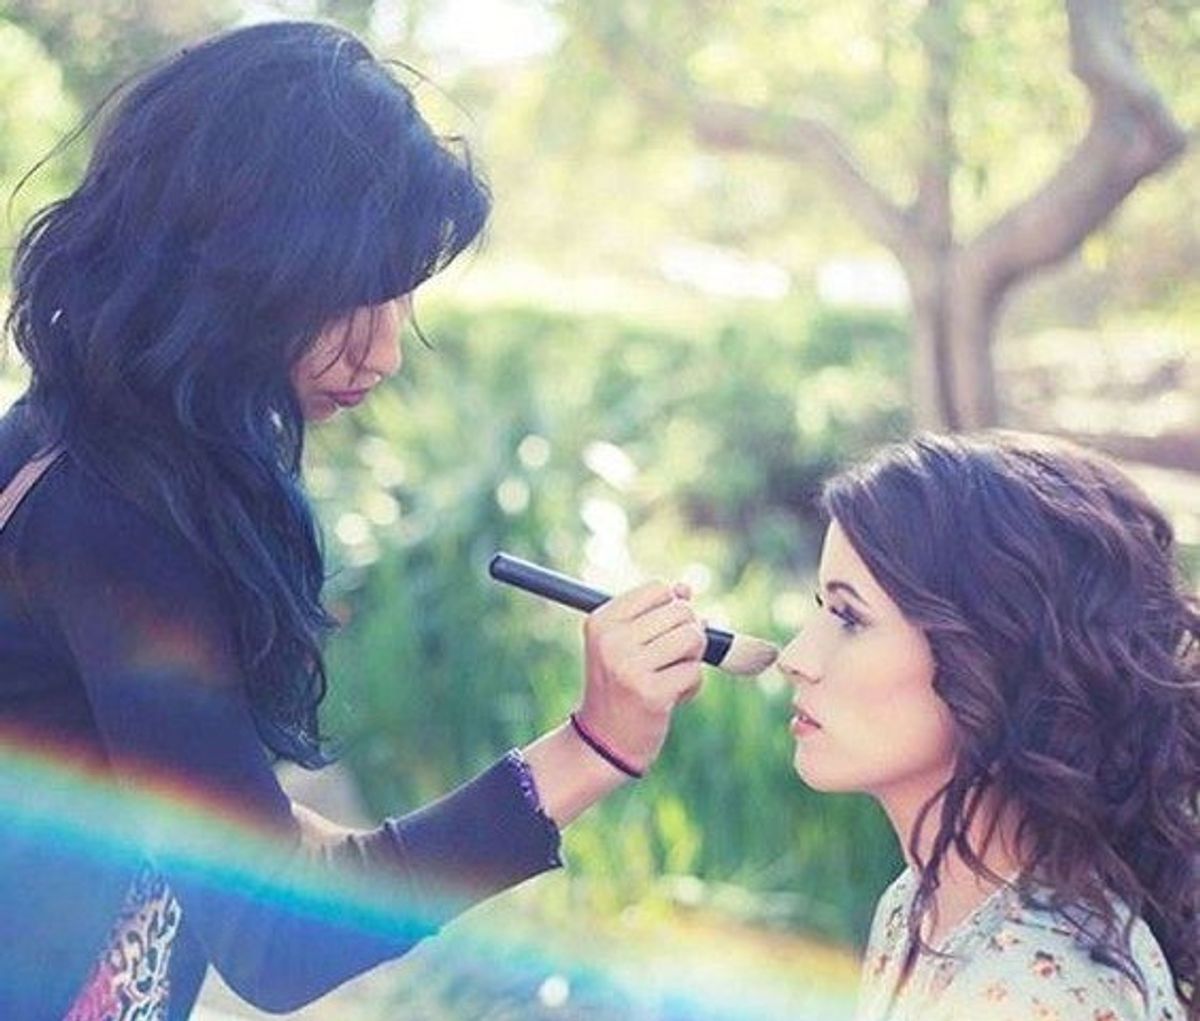 7 Reasons To Love Your Personal Makeup Artist